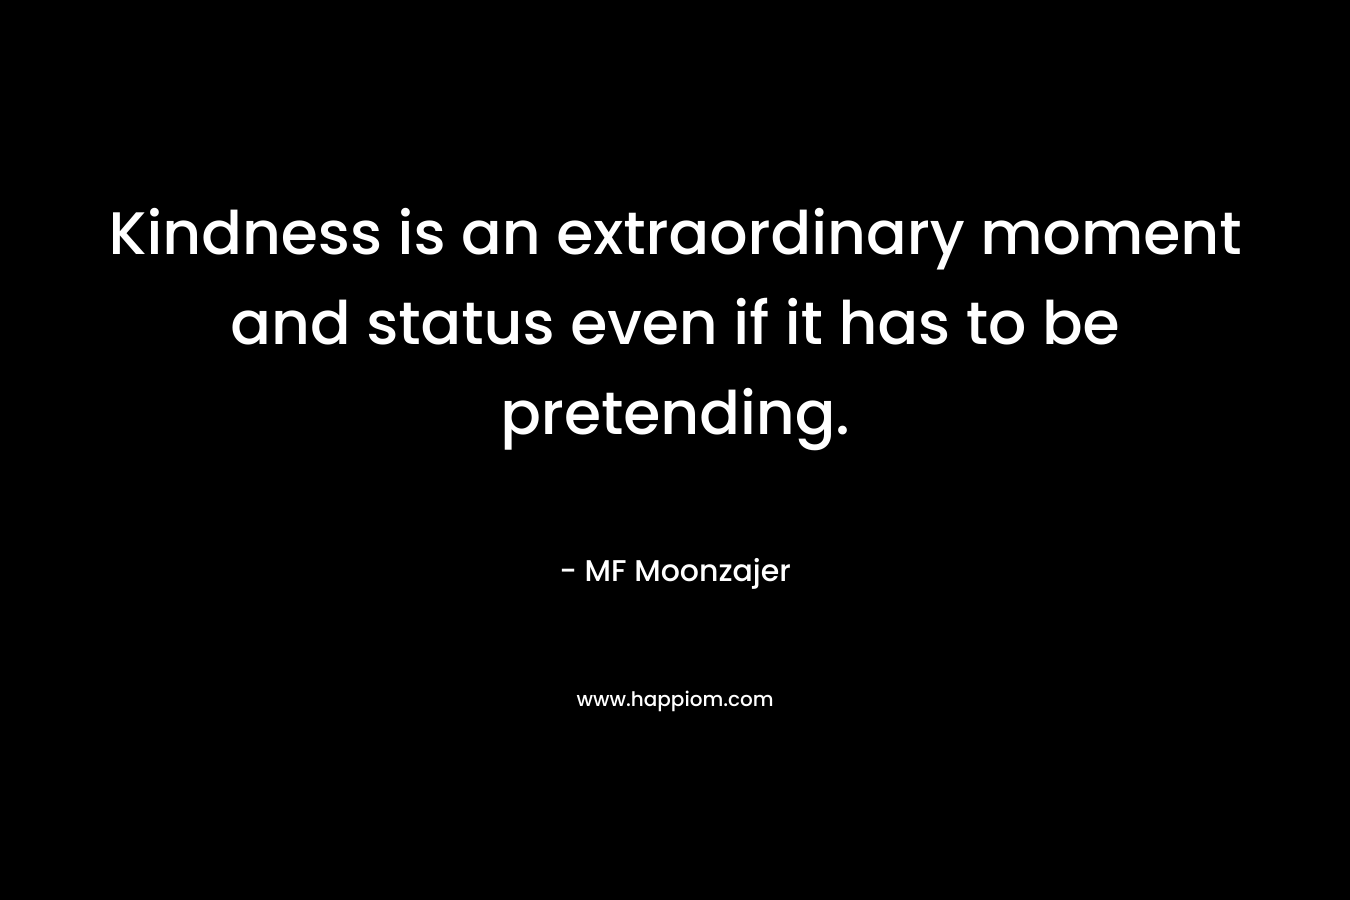 Kindness is an extraordinary moment and status even if it has to be pretending.